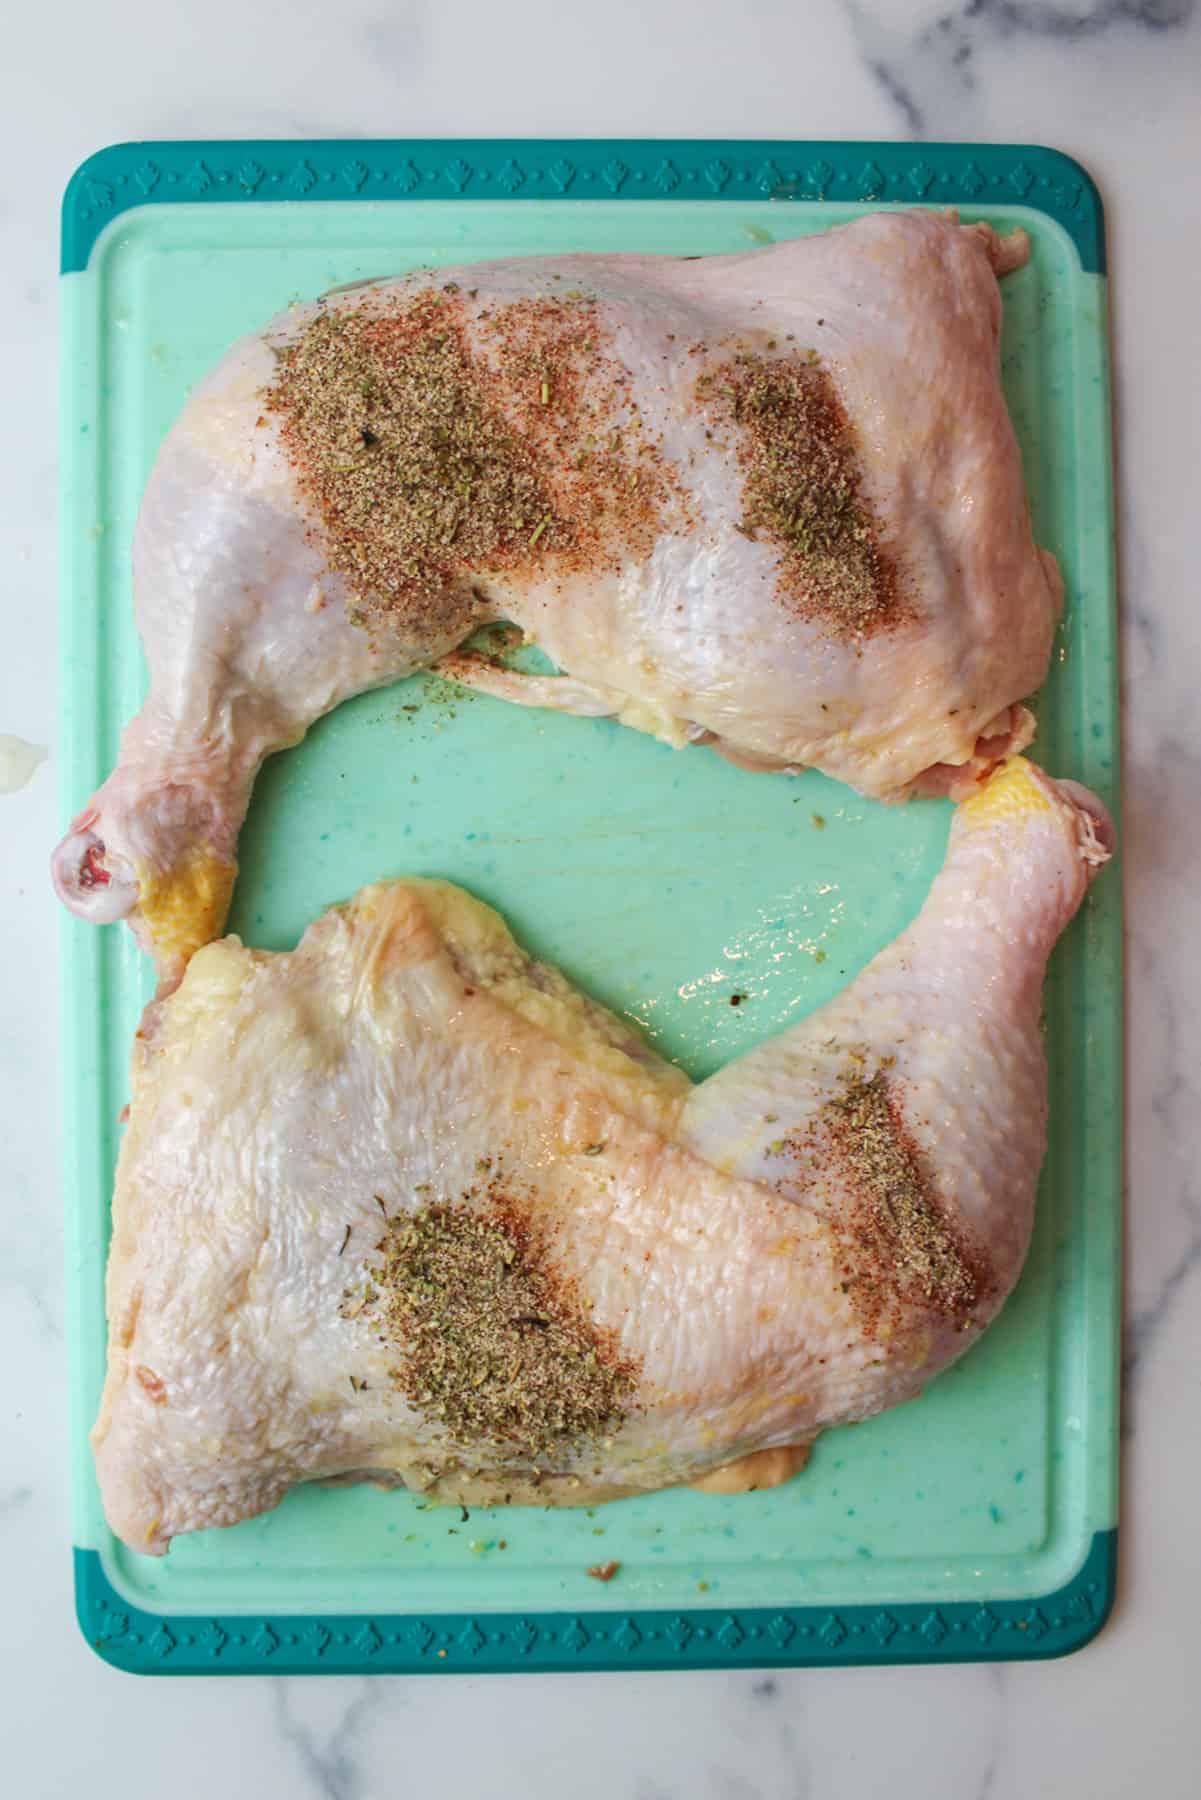 sprinkled seasoning over chicken quarters on cutting board